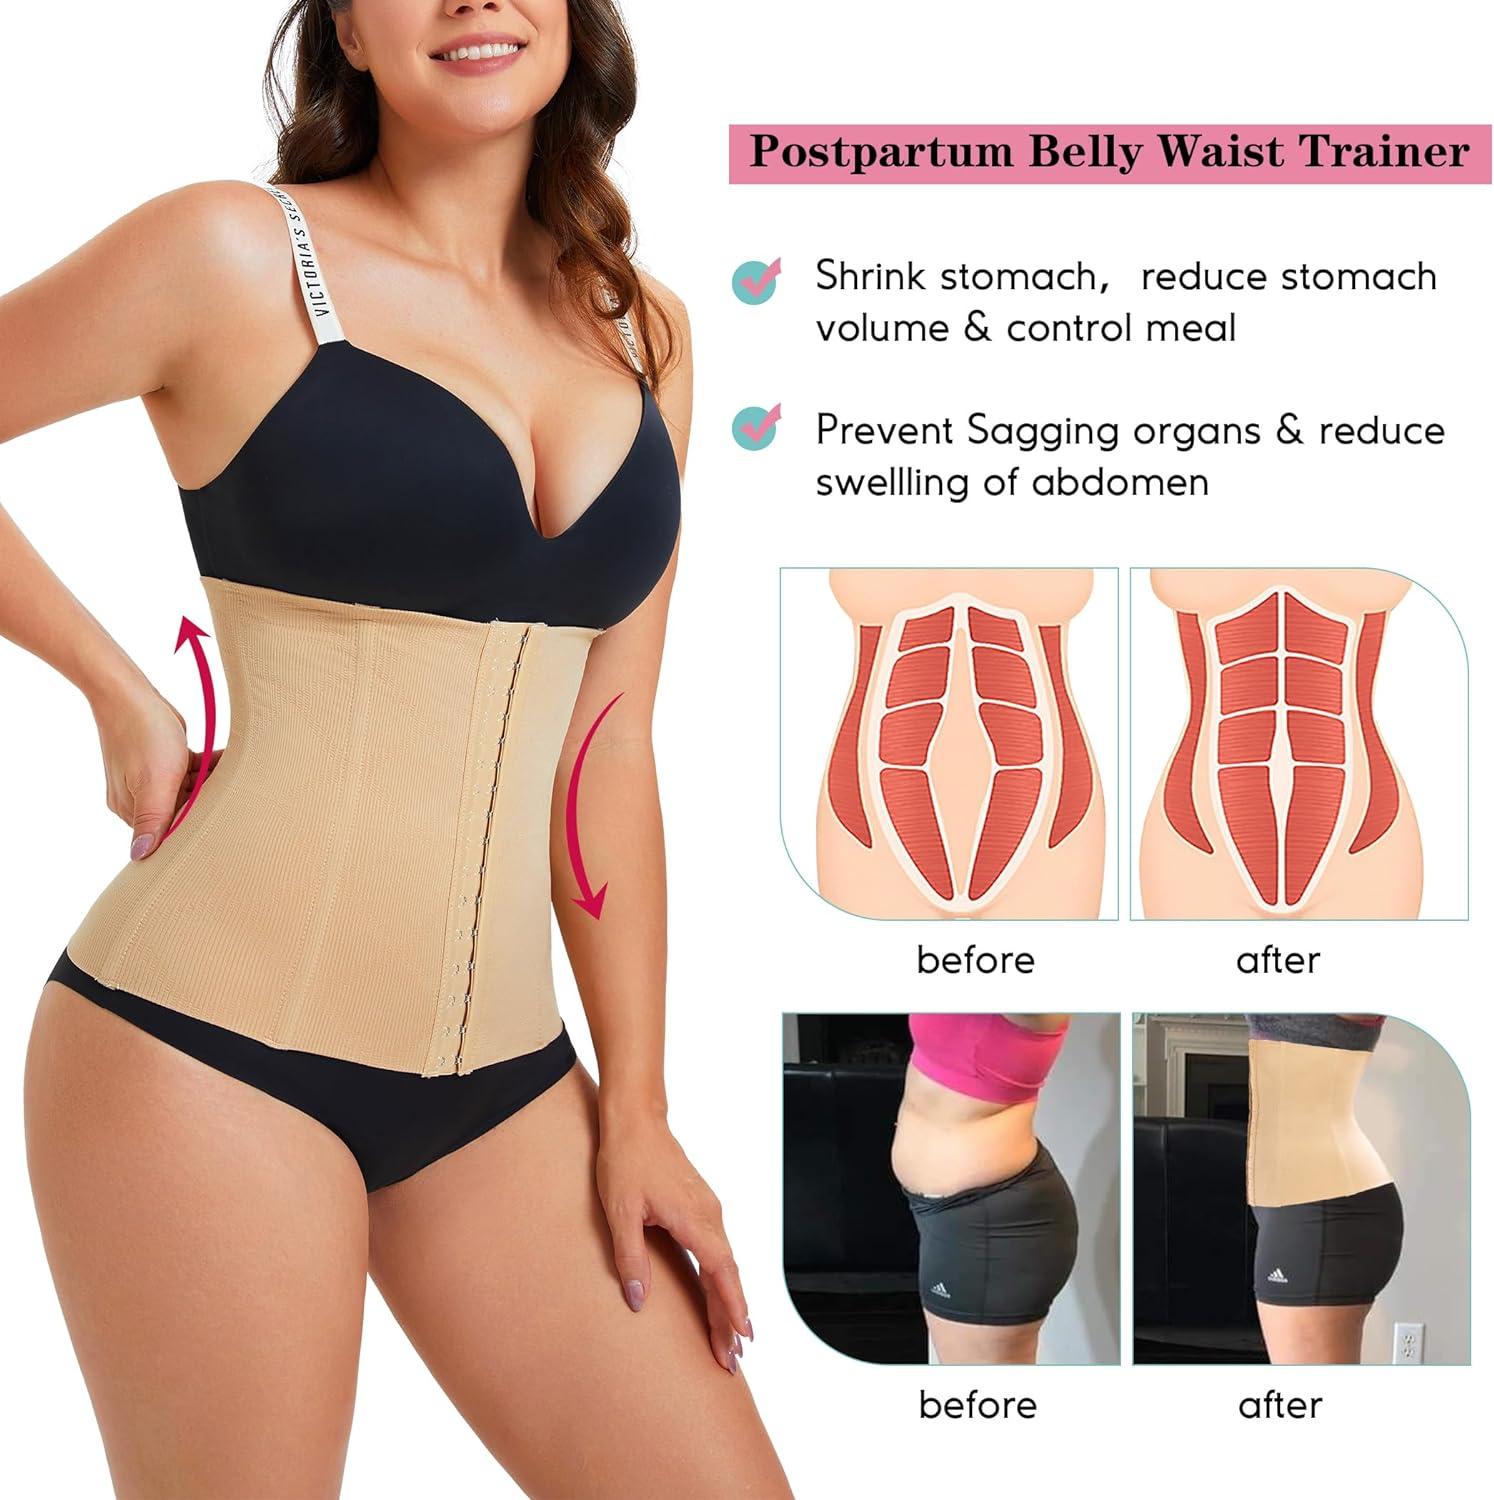  LODAY 2 In 1 Postpartum Recovery Belt,Body Wraps Works For  Tighten Loose Skin